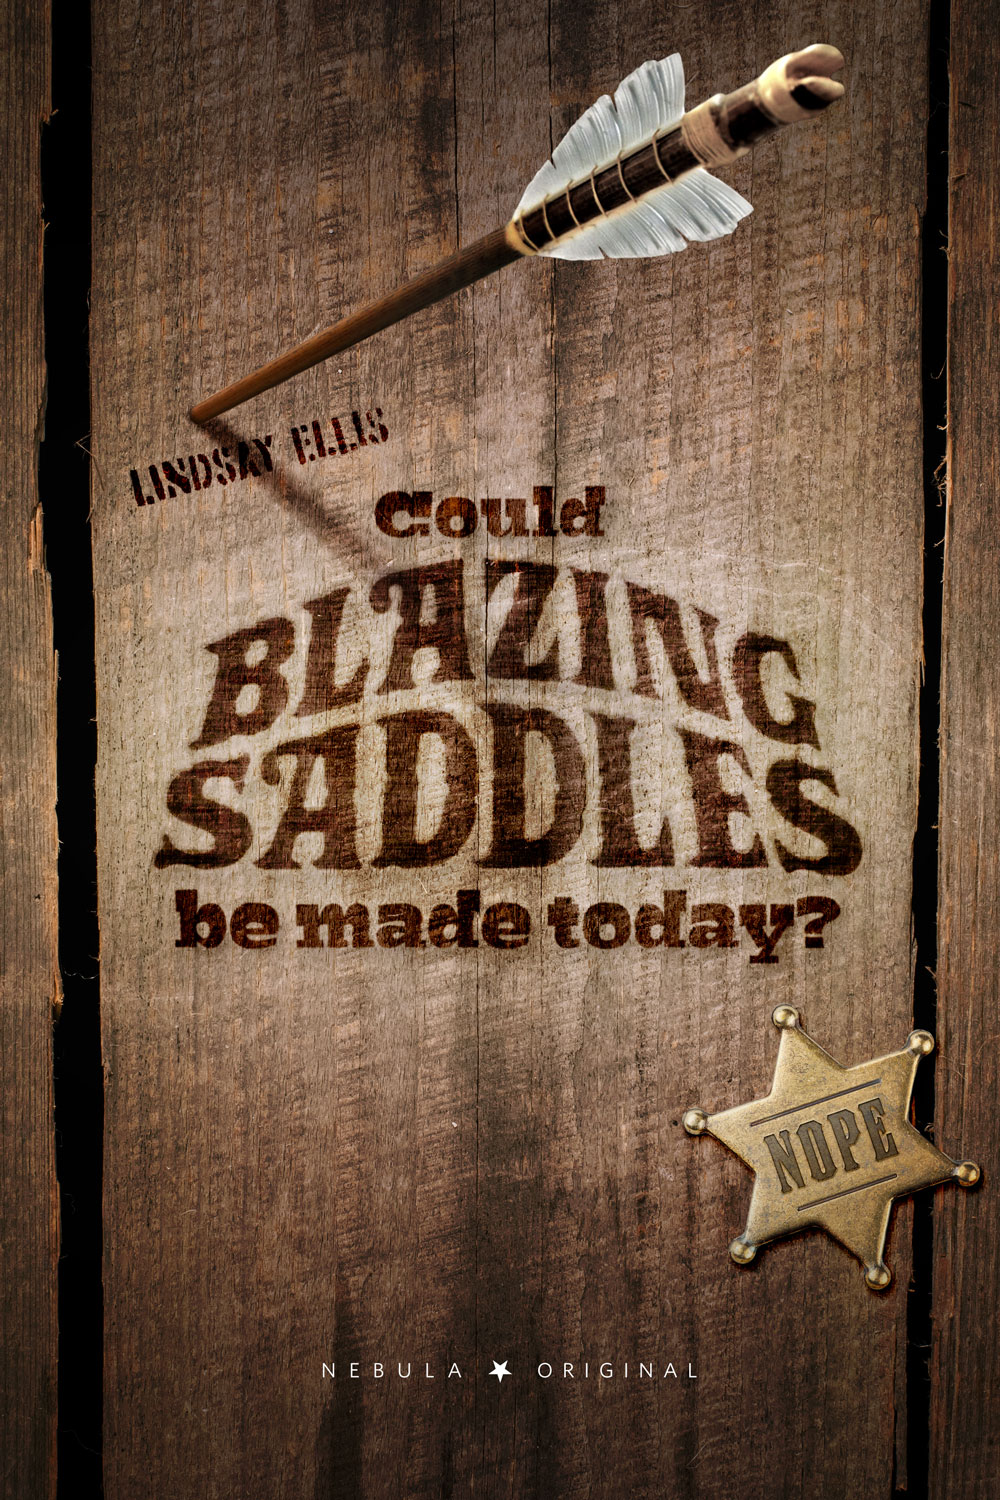 Could Blazing Saddles be made today?